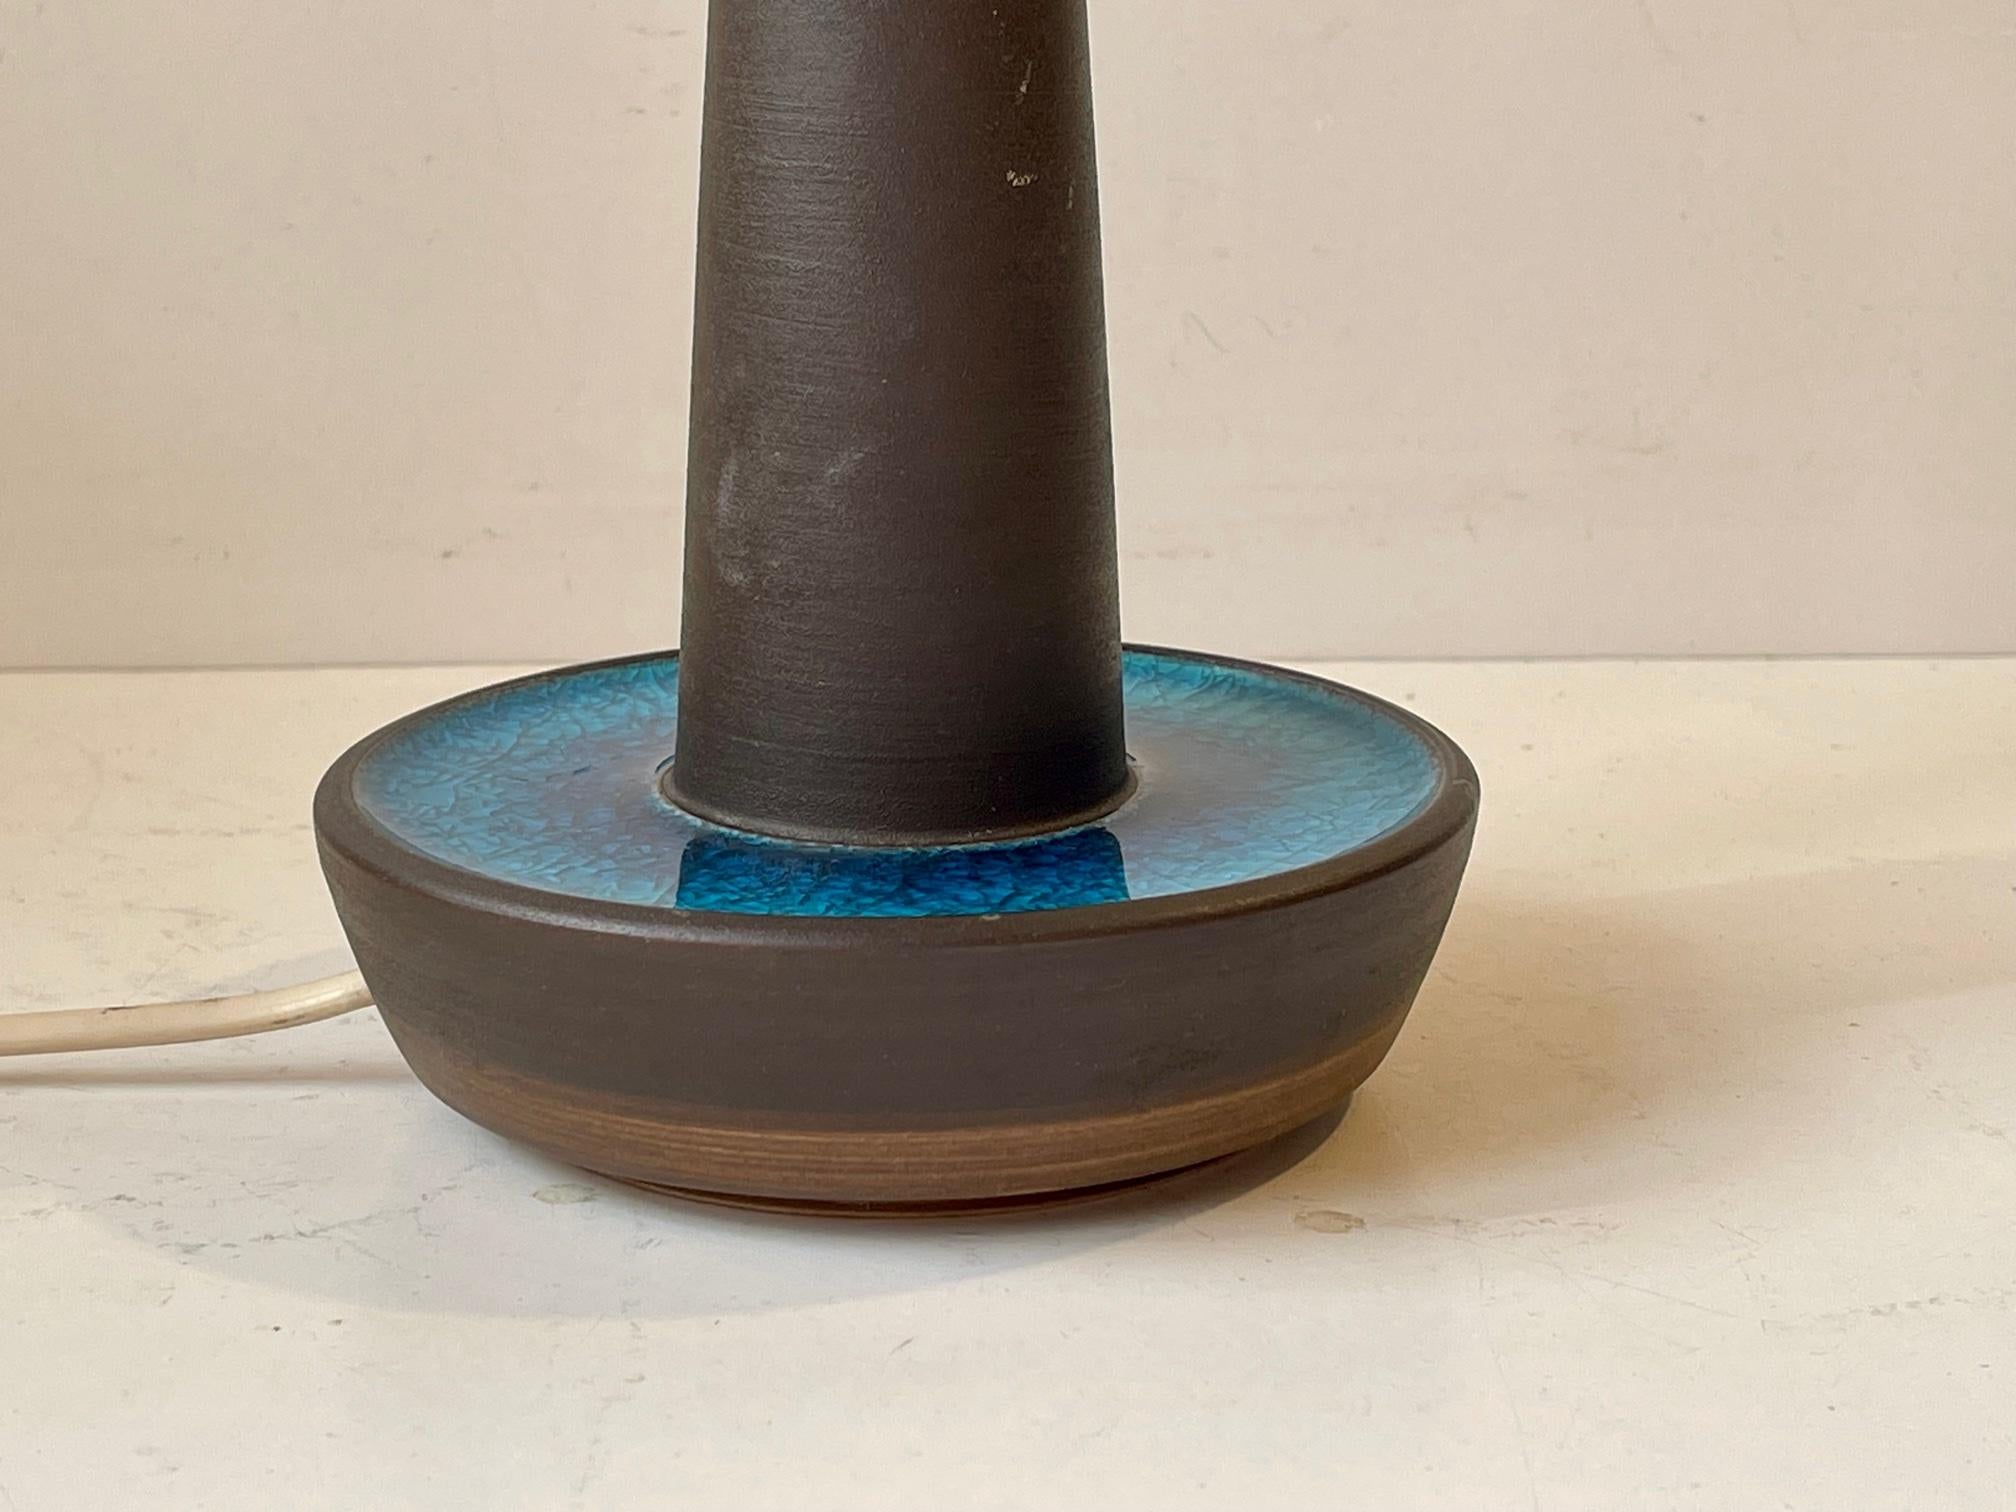 Table Lamp with Turquoise Glaze by Einar Johansen, Søholm, 1960s In Good Condition For Sale In Esbjerg, DK